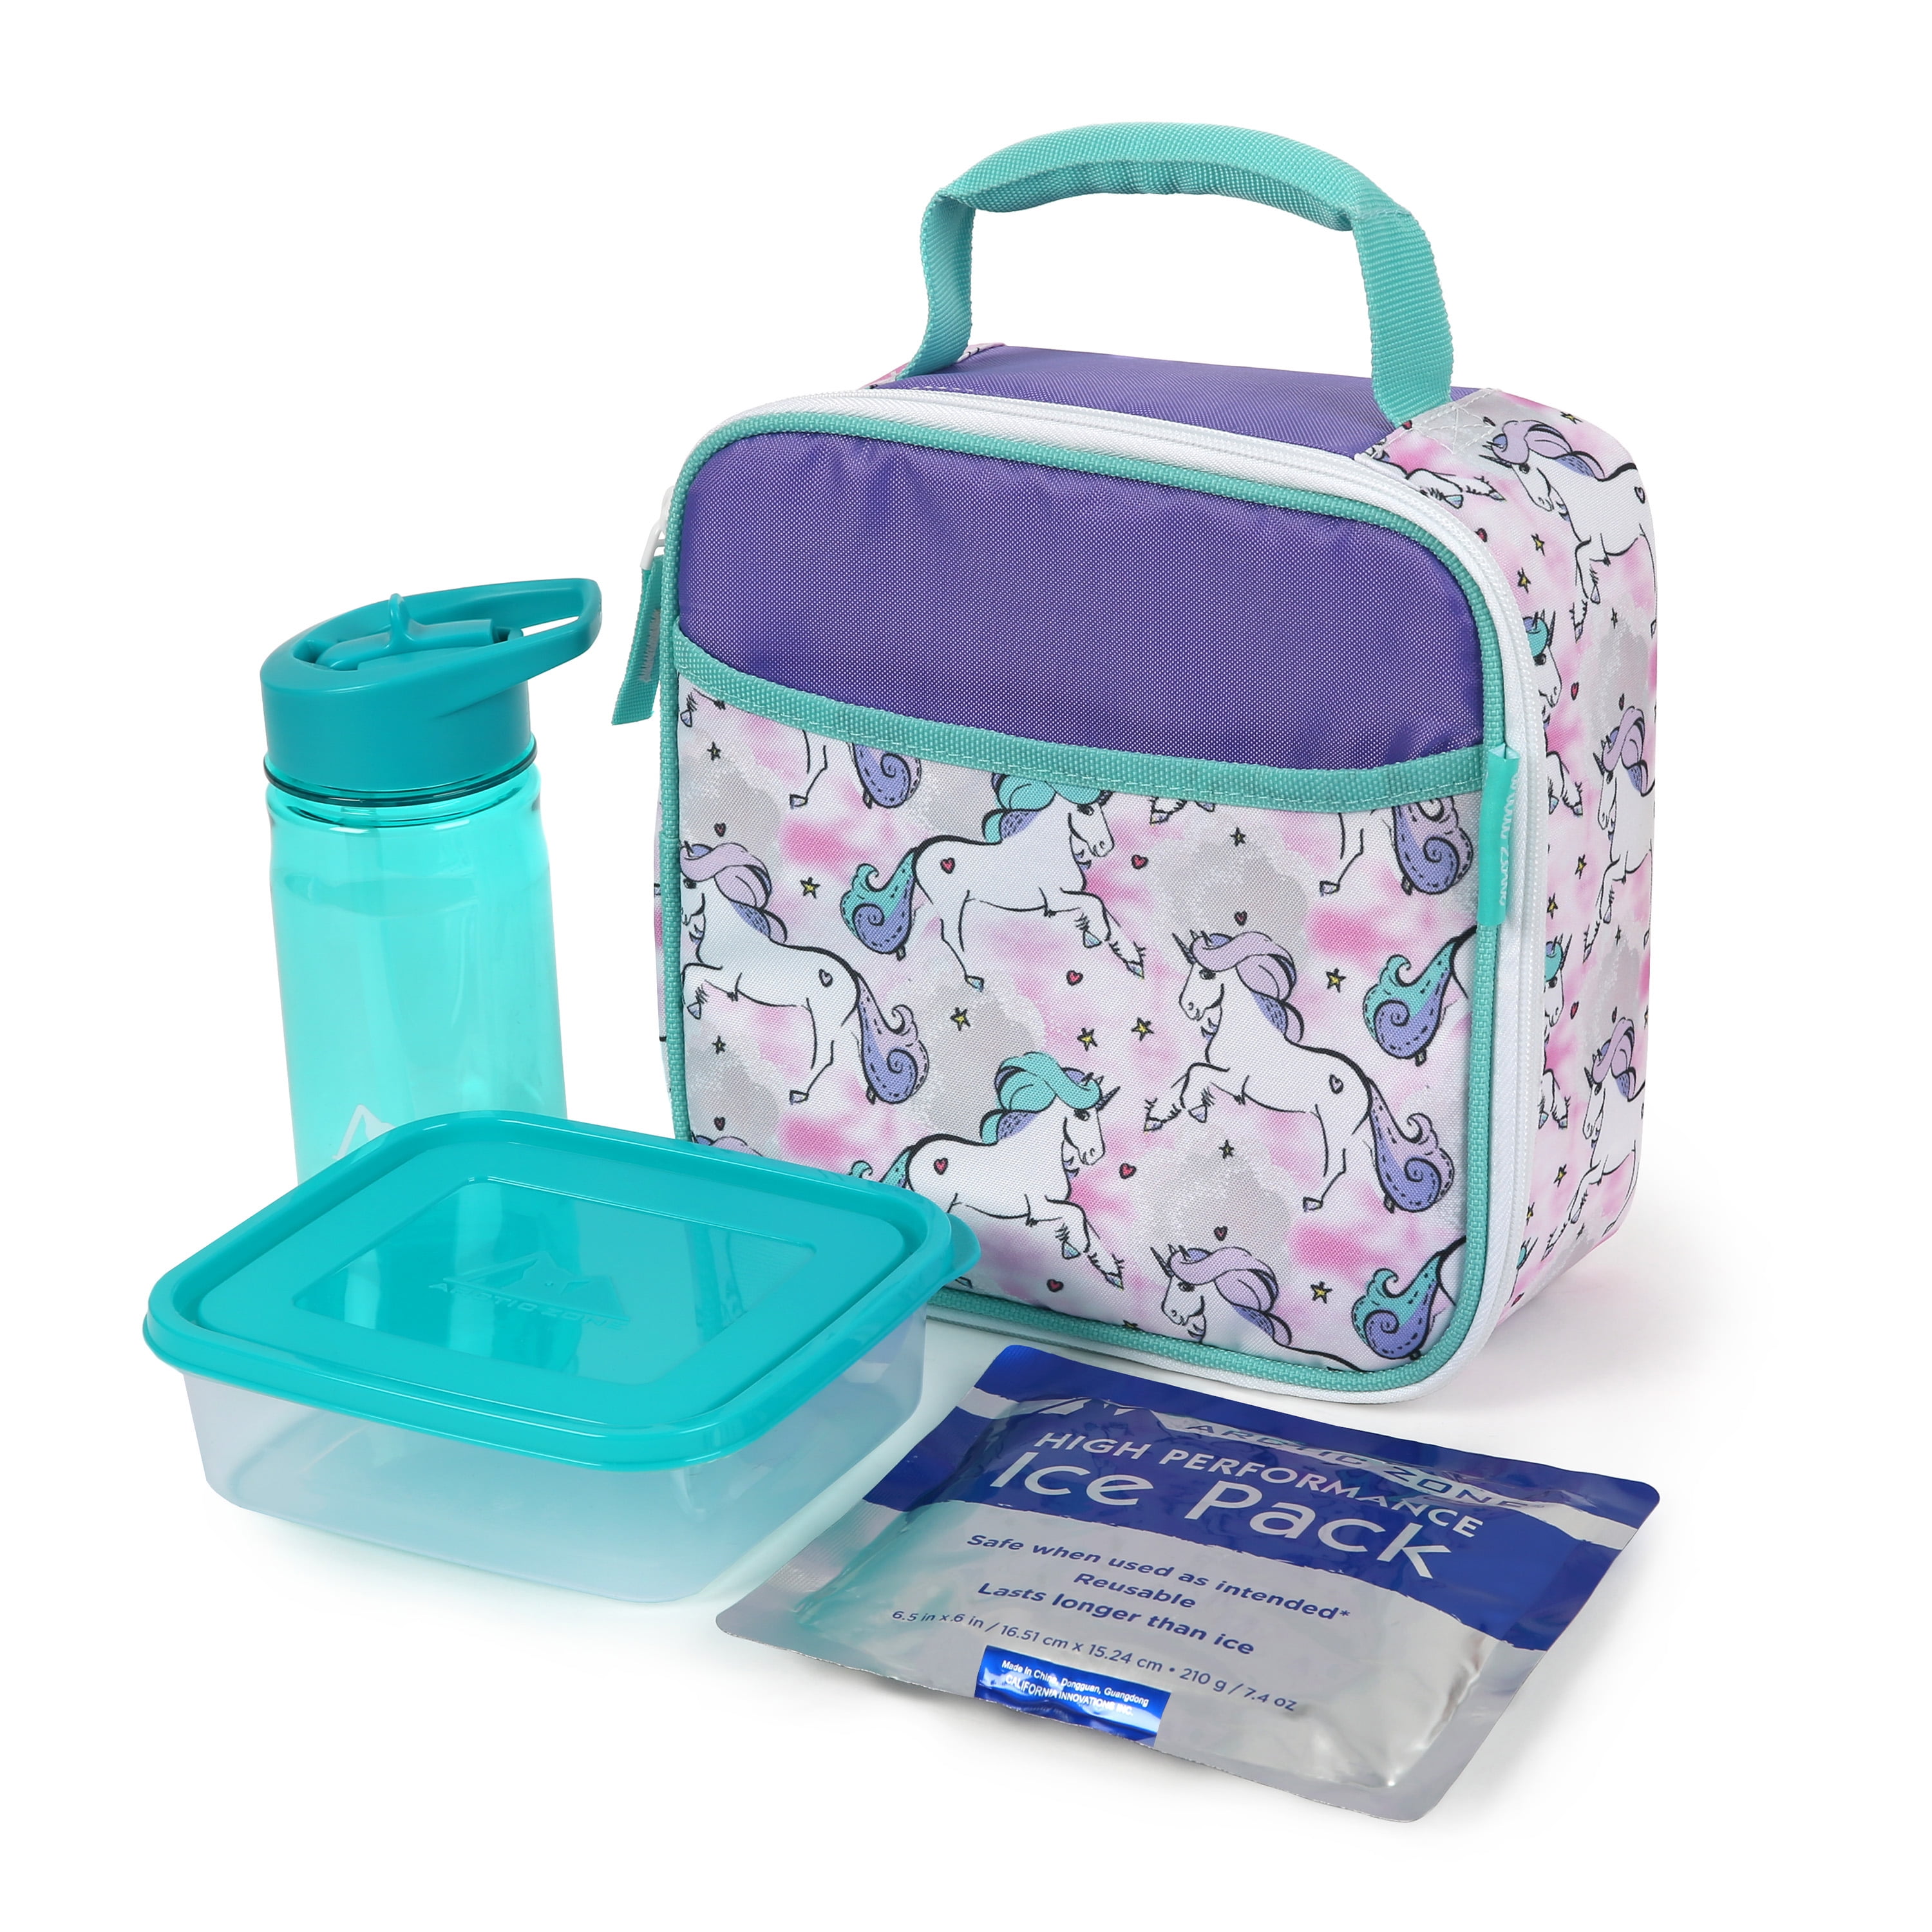 Details about   Under One Sky Adorable UNICORN Insulated LUNCH BOX Bag 